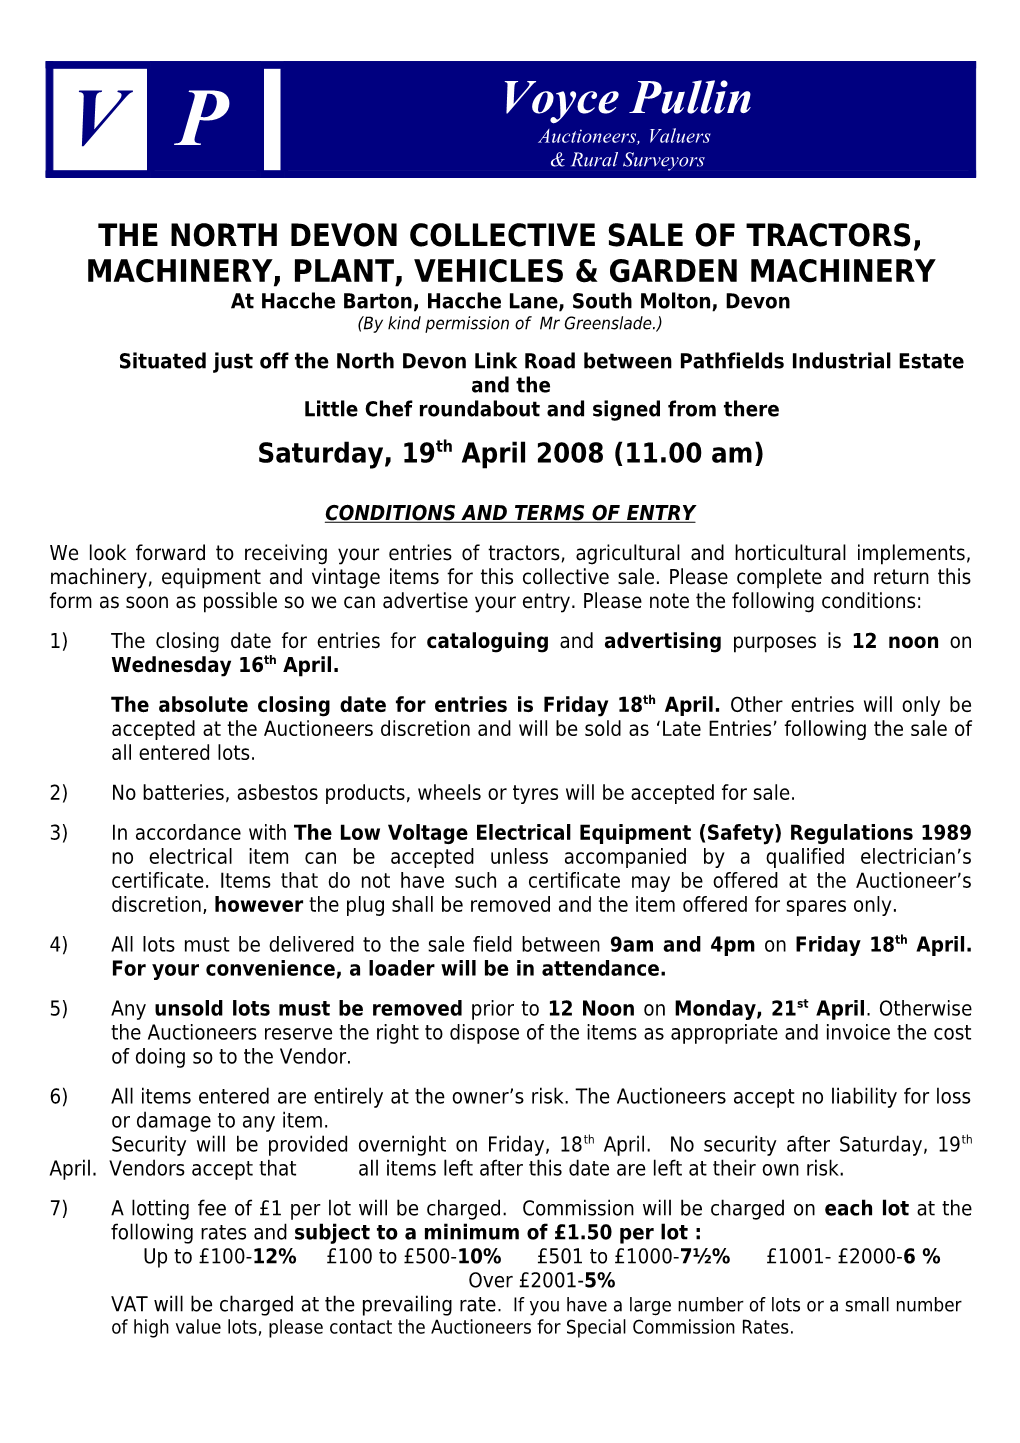 Iron Acton Machinery & Implement Sale